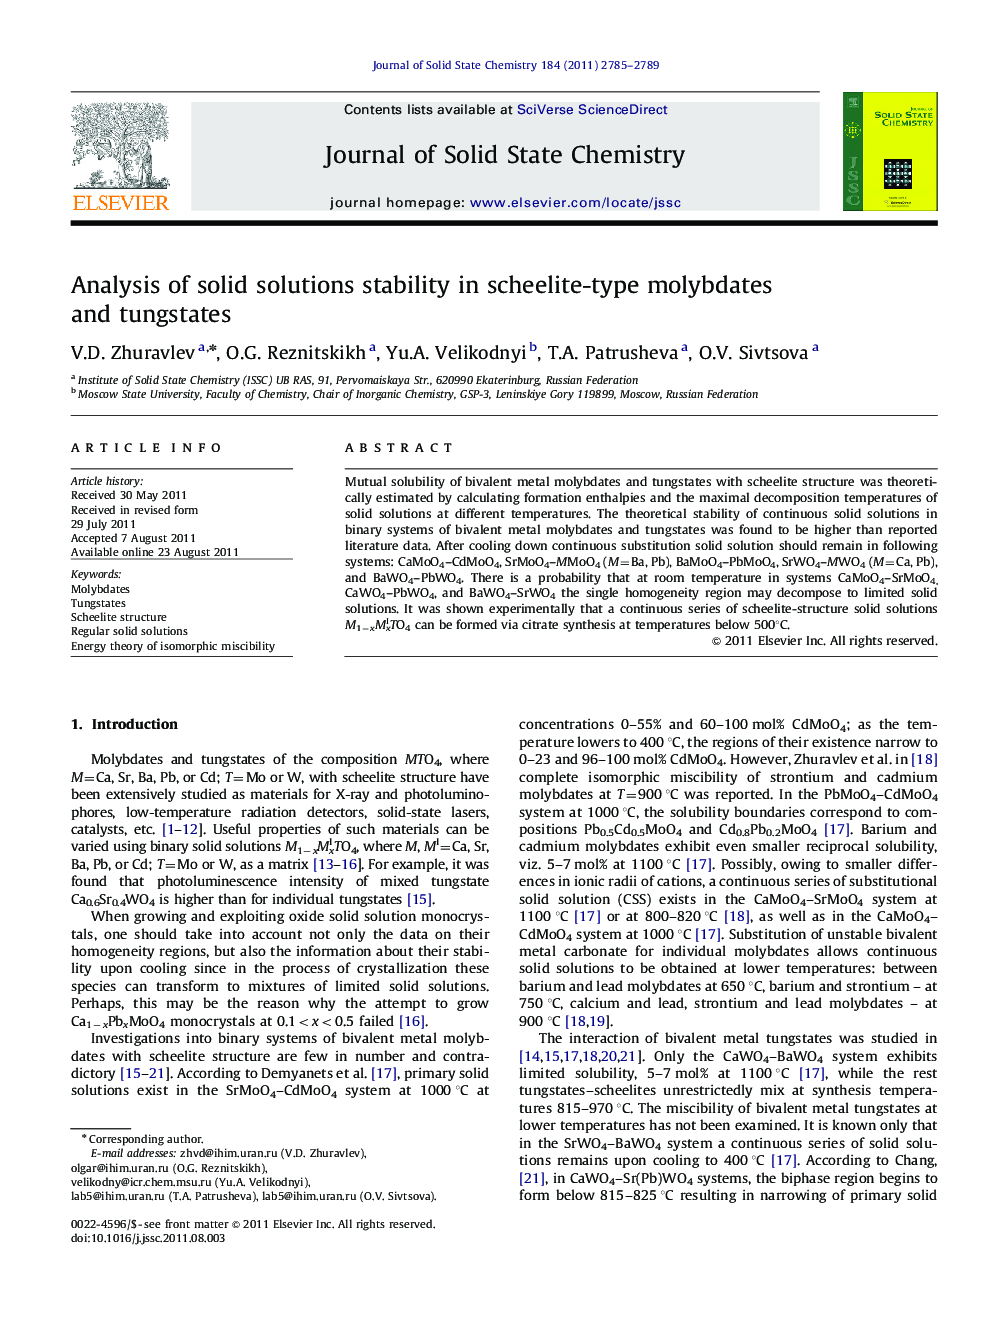 Analysis of solid solutions stability in scheelite-type molybdates and tungstates